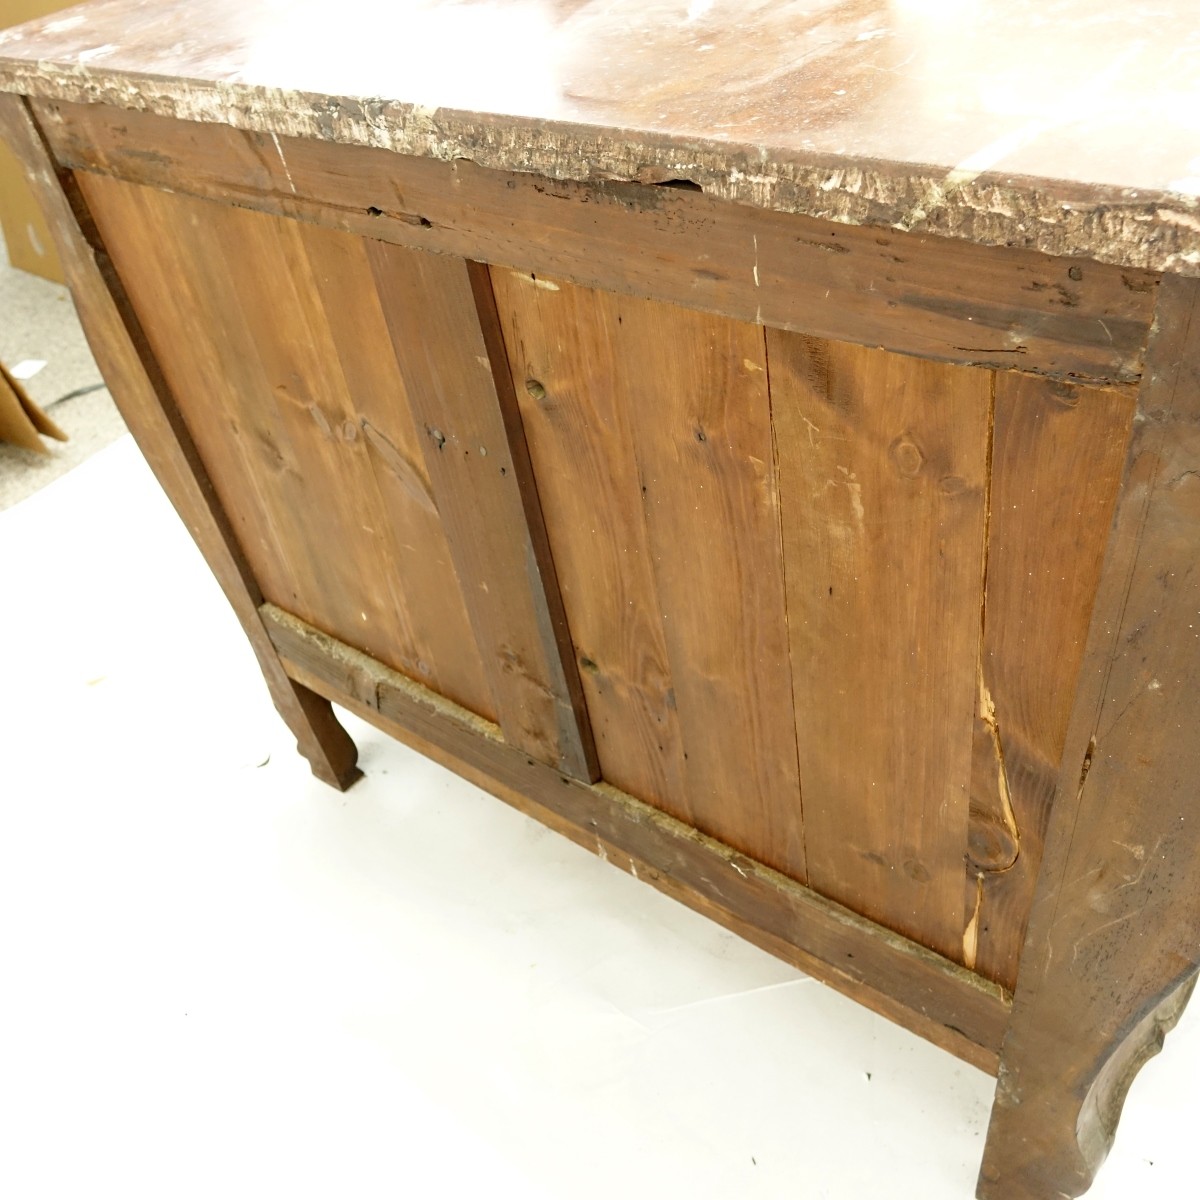 19th C. French Marble Top Commode